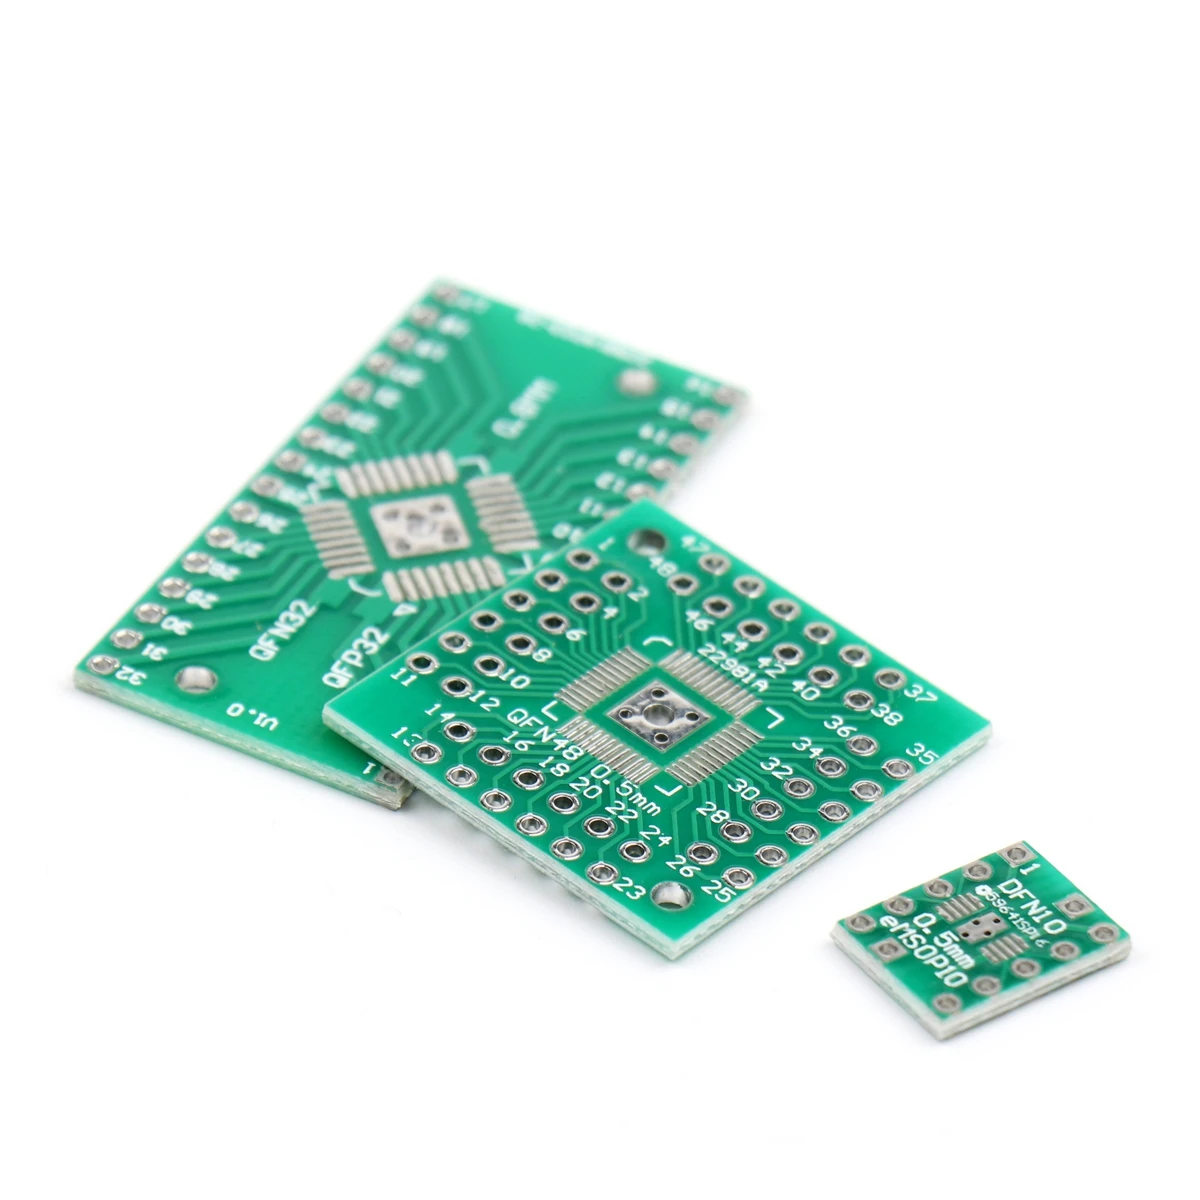 10Pcs QFN10 QFN16 QFN20 QFN32 QFN44 QFN56 QFN64 Adapter Board QFN to 0.5mm 0.65mm 0.8mm SMT Test Board PCB Plate